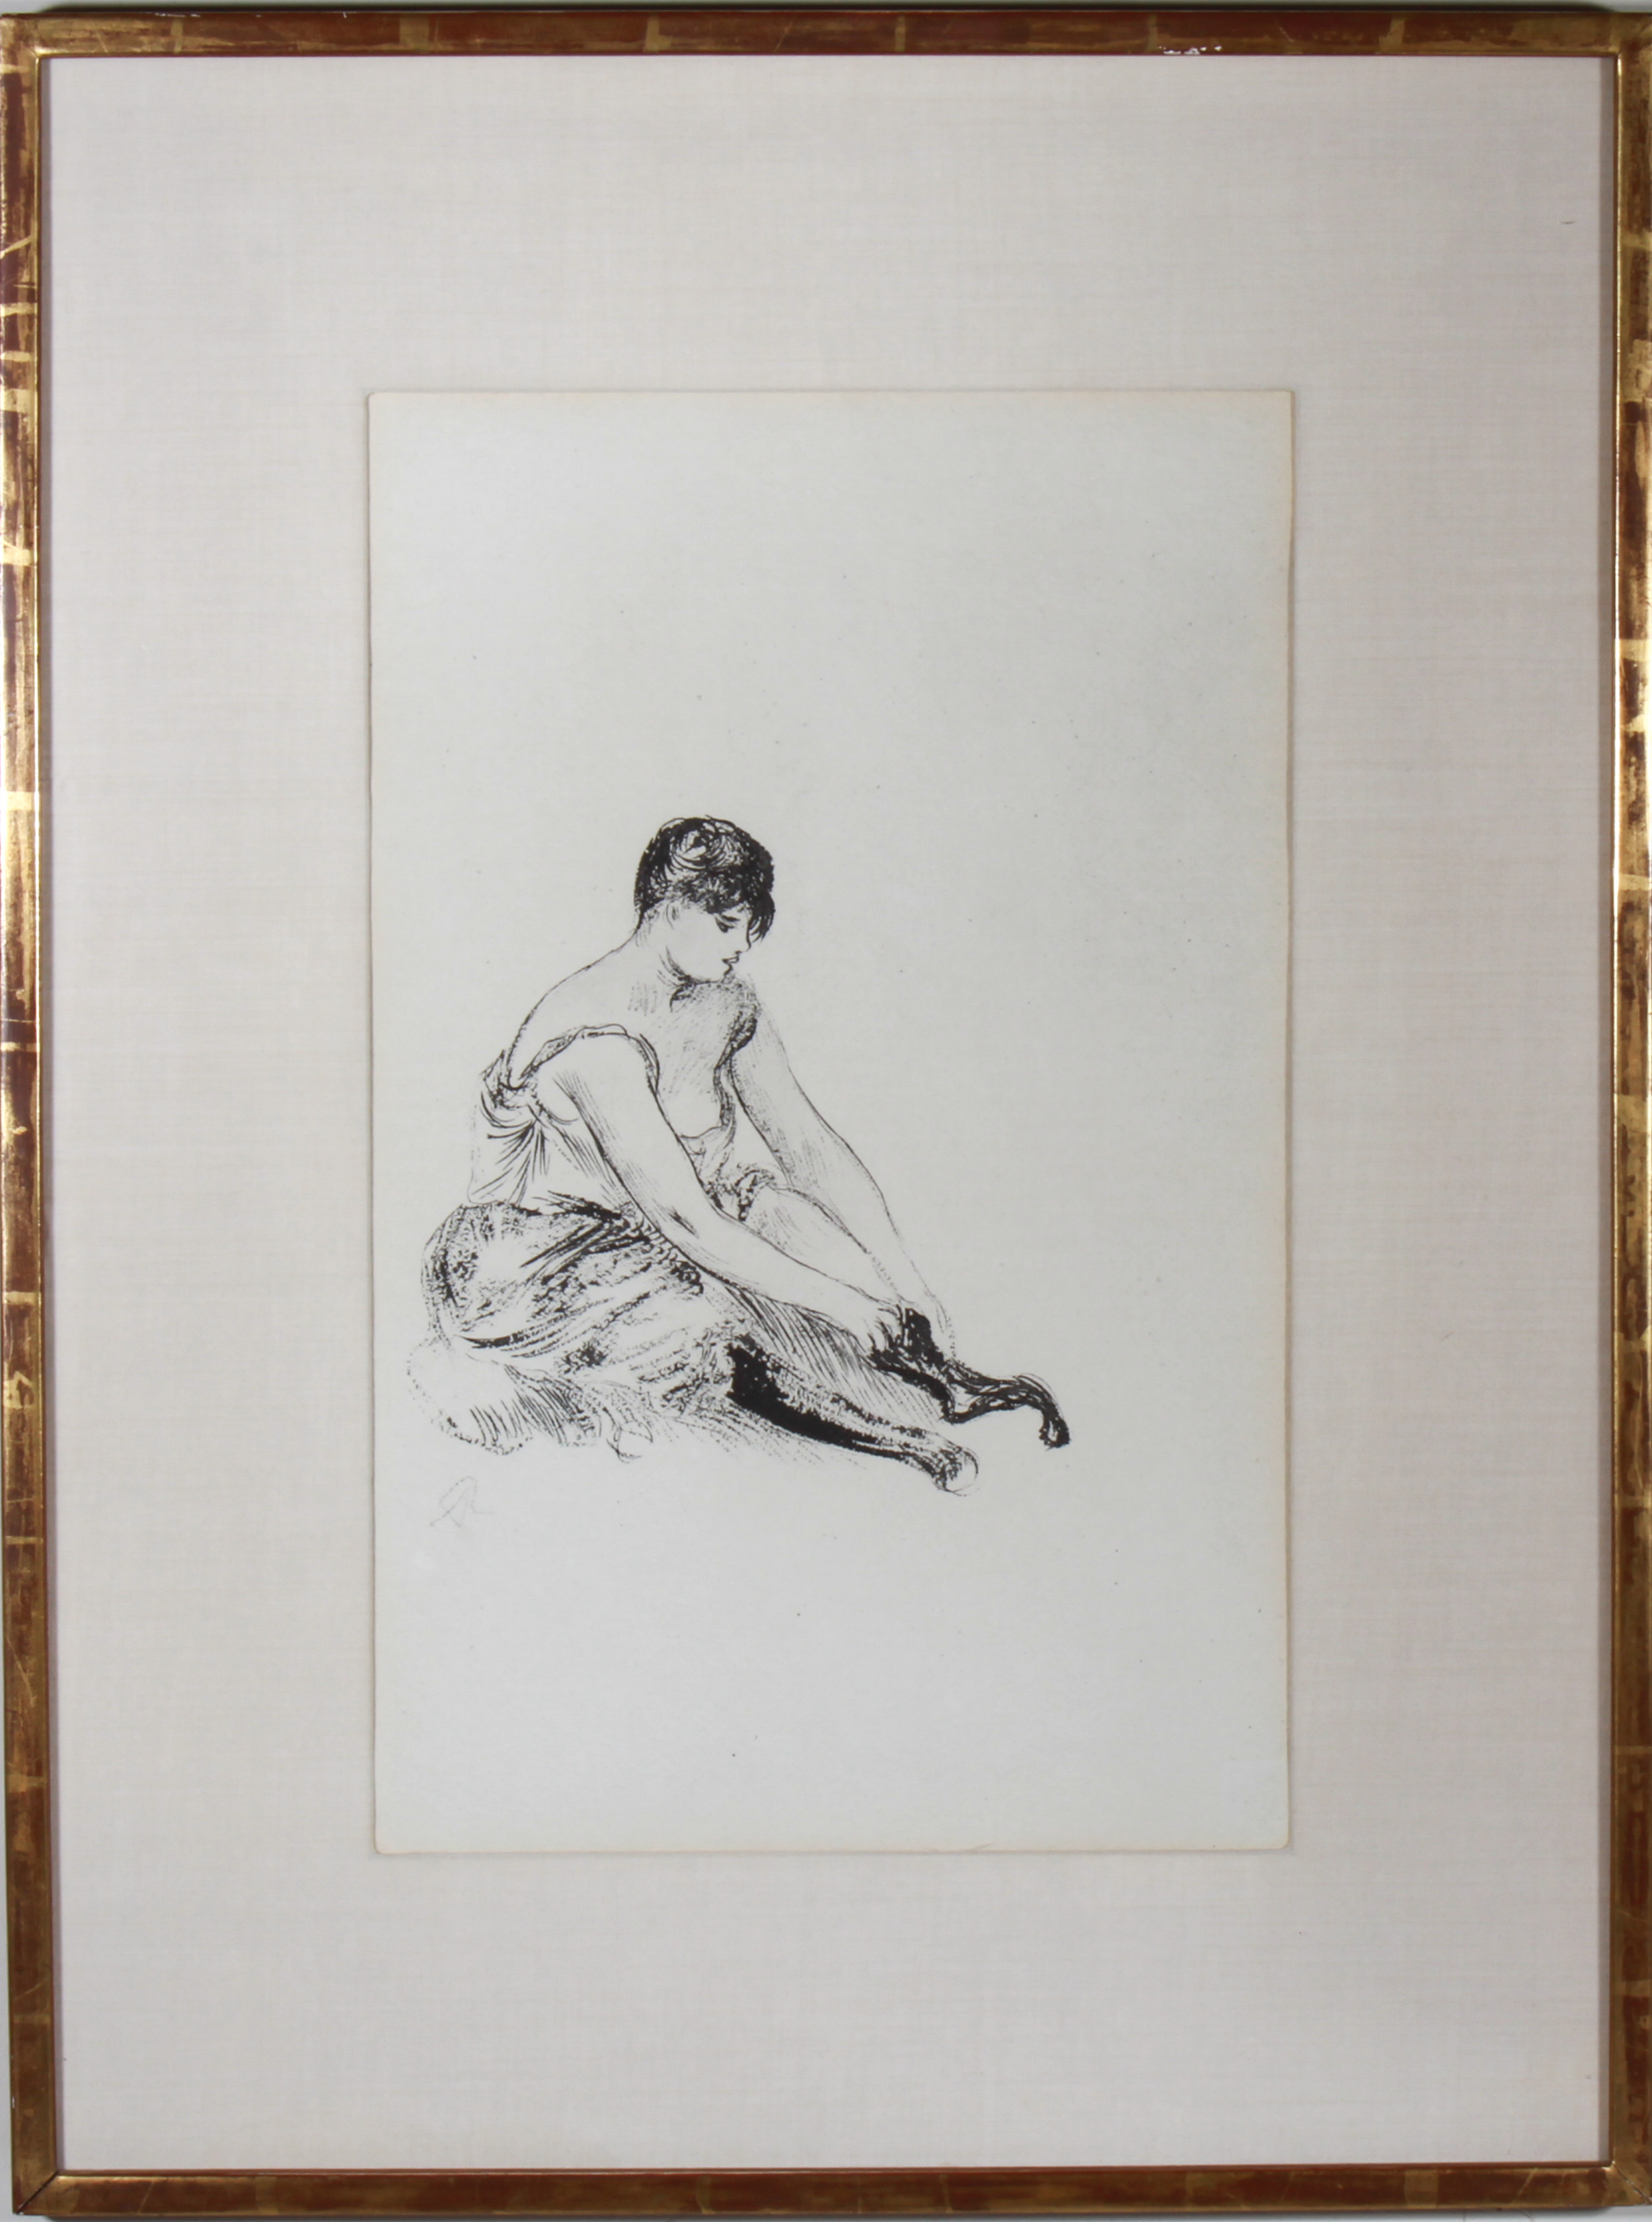 RENOIR MANNER STOCKINGS LITHOGRAPH 3c369f